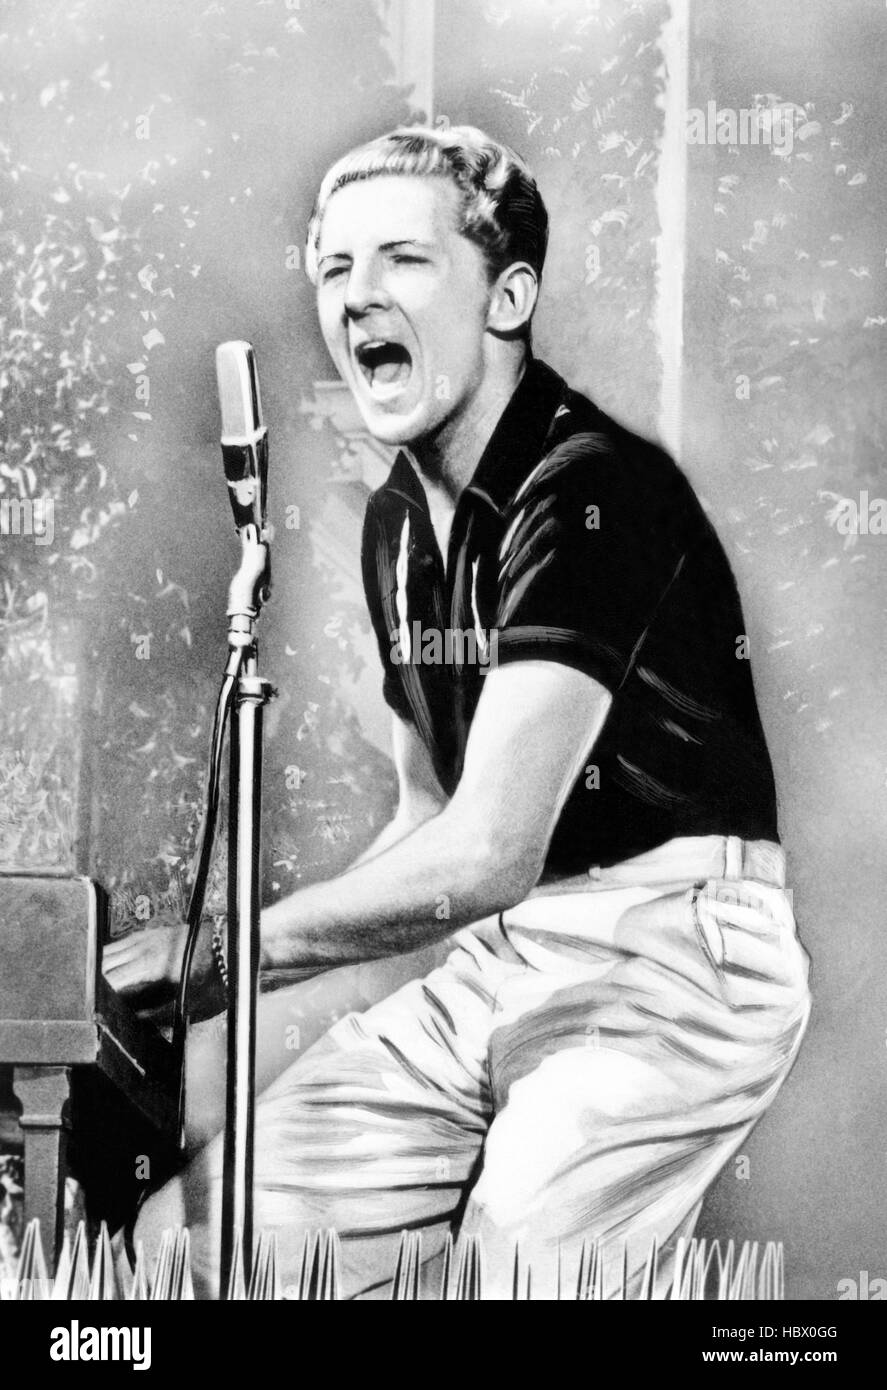 HIGH SCHOOL CONFIDENTIAL!, Jerry Lee Lewis, 1958 Stock Photo